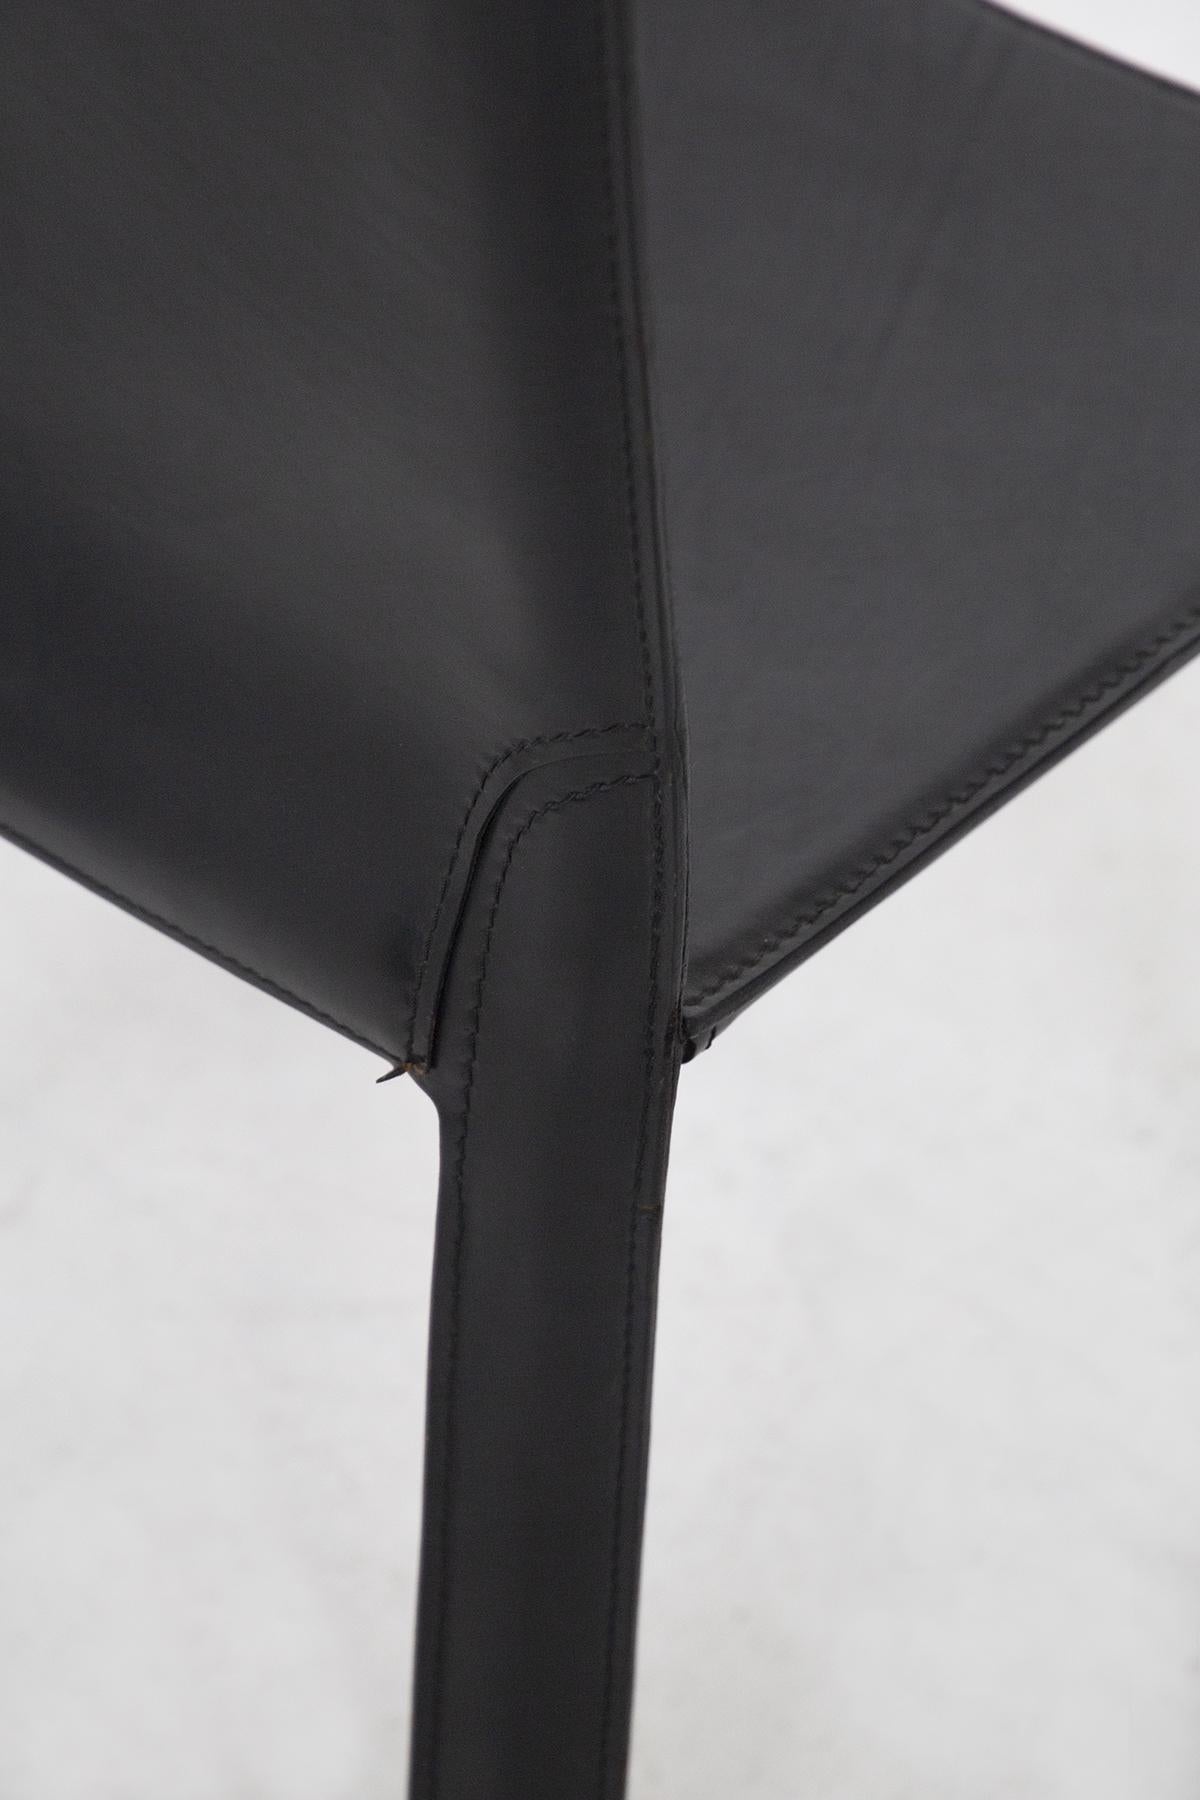 Italian Black Leather Chairs by Mario Bellini for Cassina